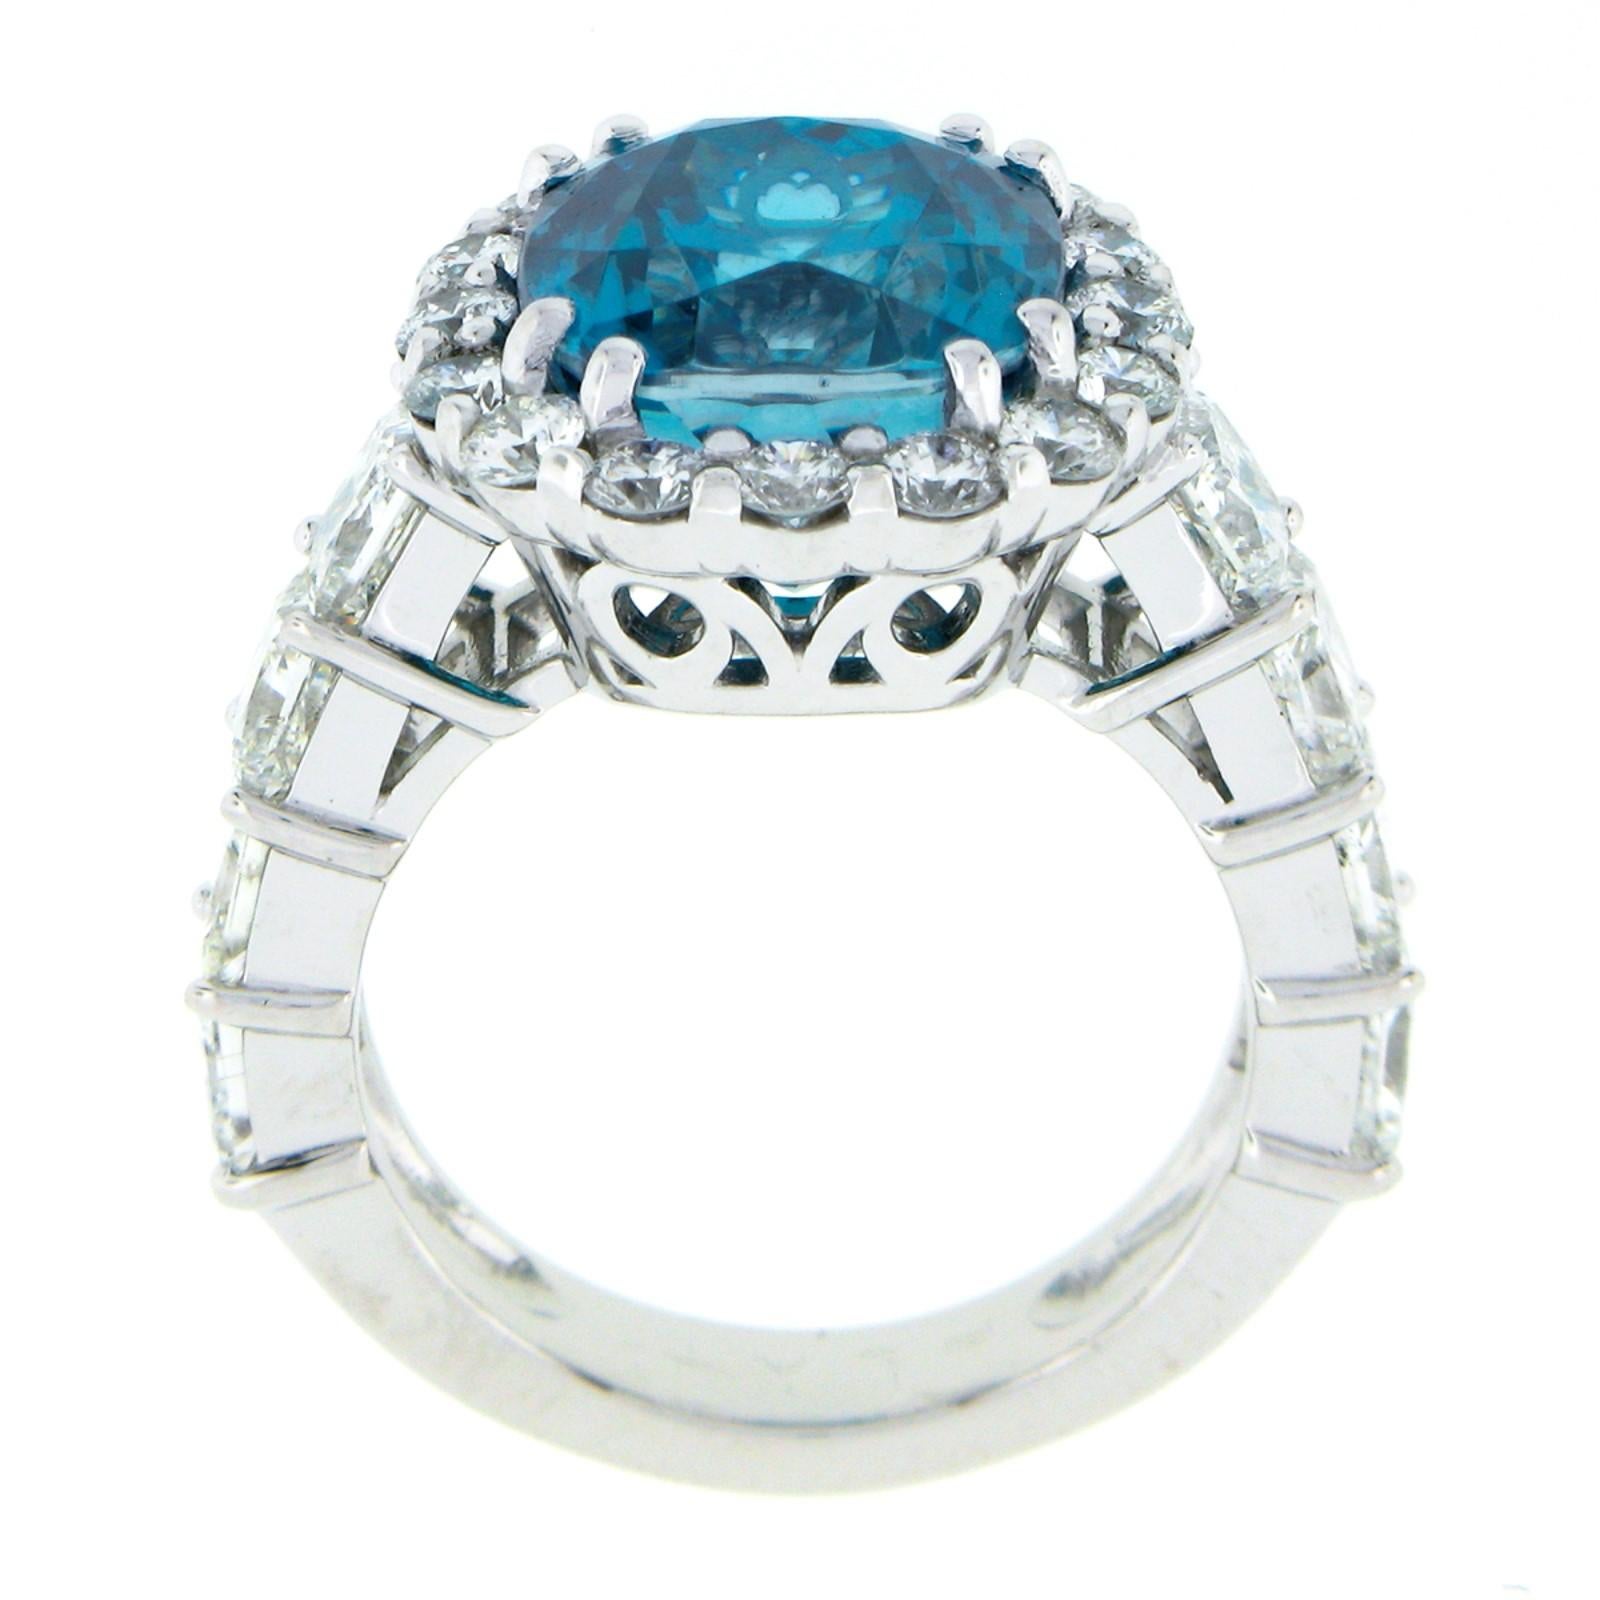 Platinum GIA 16.53ctw Large Cushion Blue Zircon Diamond Accents Cocktail Ring For Sale 4